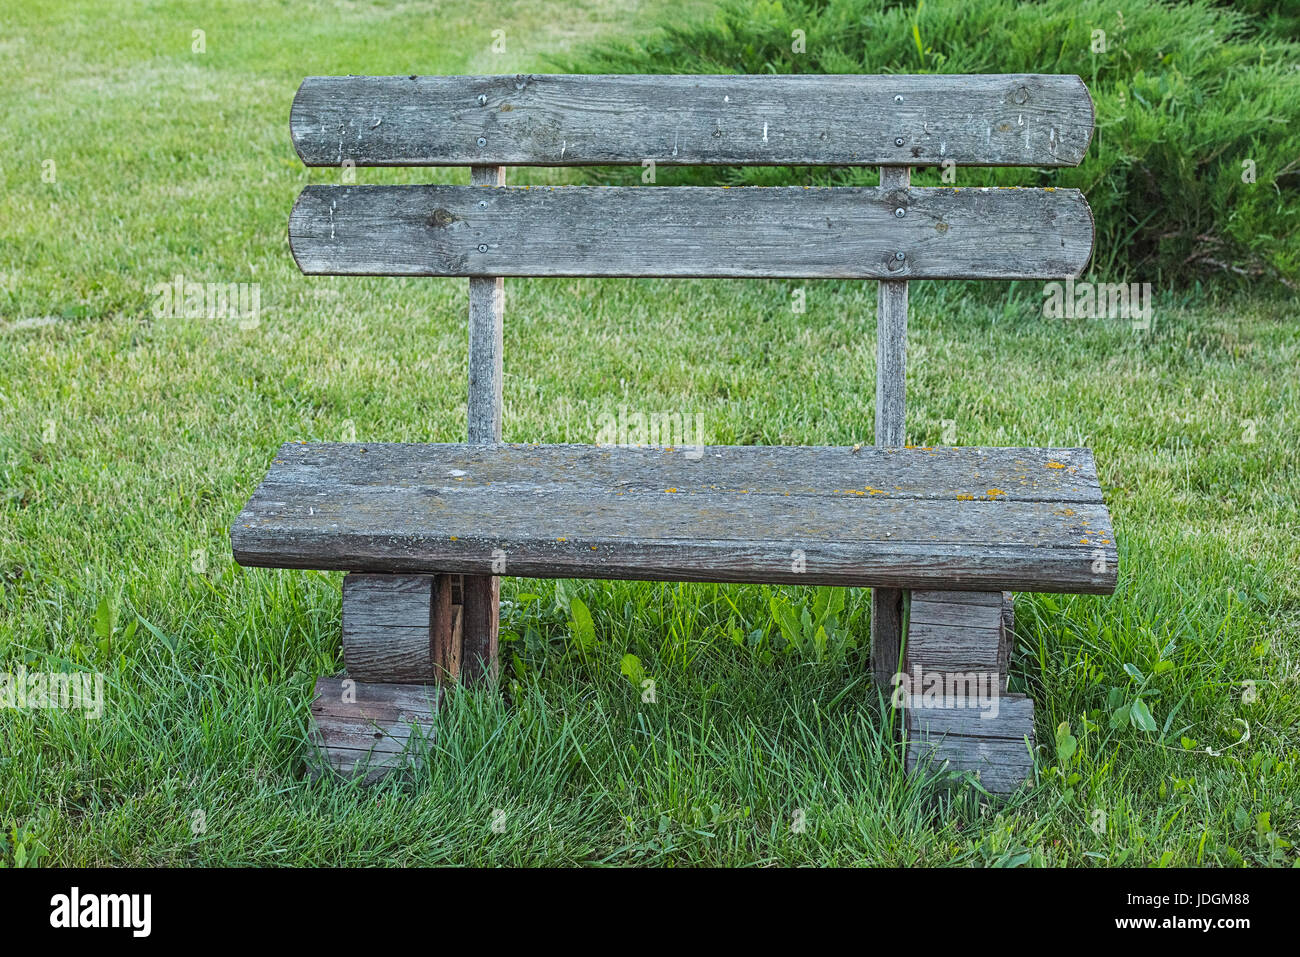 Front view of old handmade wooden bench standing on lawn in the park or garden near juniper. Unfocused background. Stock Photo